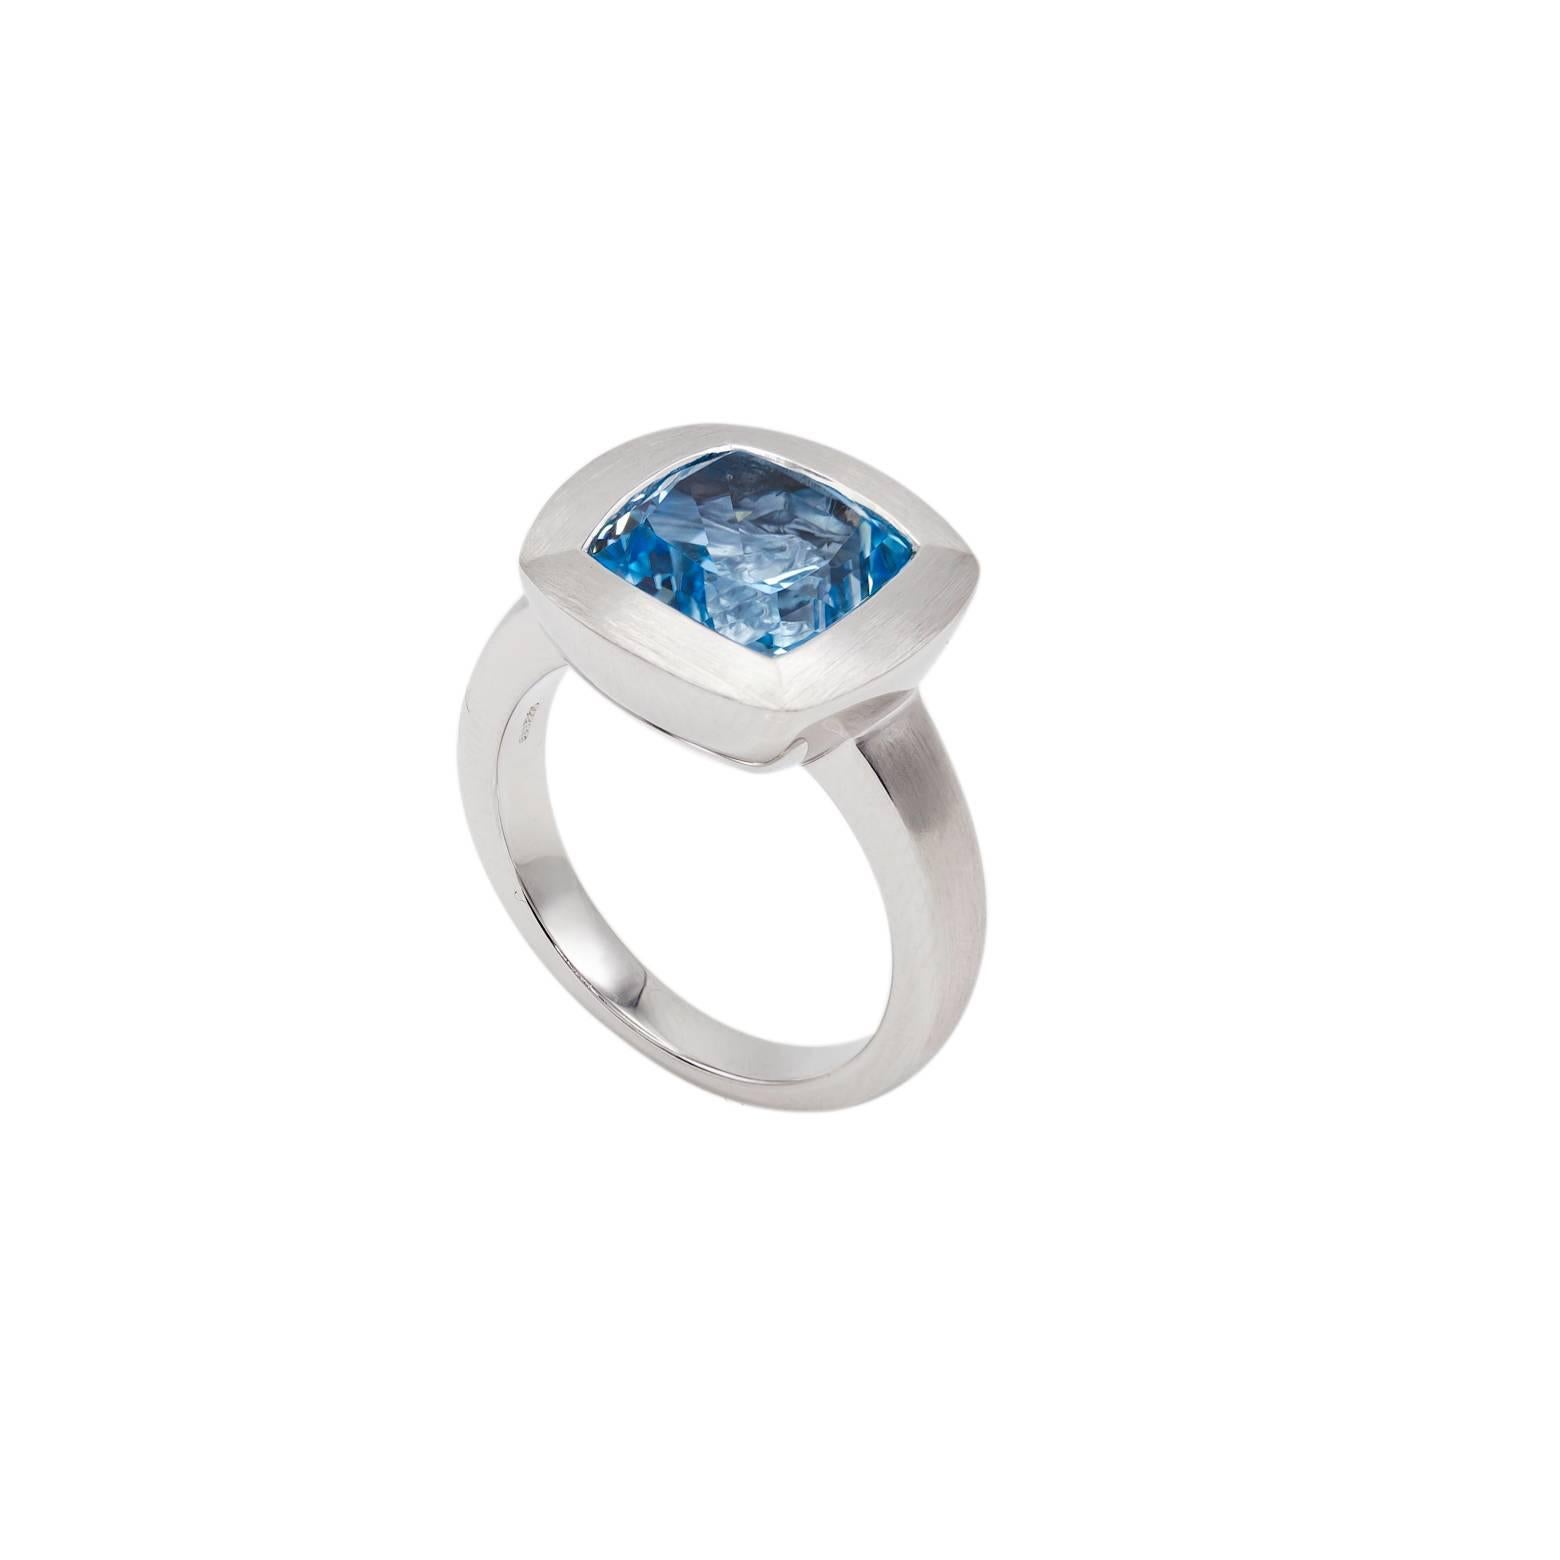 This stunning and stark brilliant blue topaz ring is set in a classic sterling silver setting. Poised and elegant this blue topaz ring subtly glows against a bright backdrop that speaks of strength and style. 